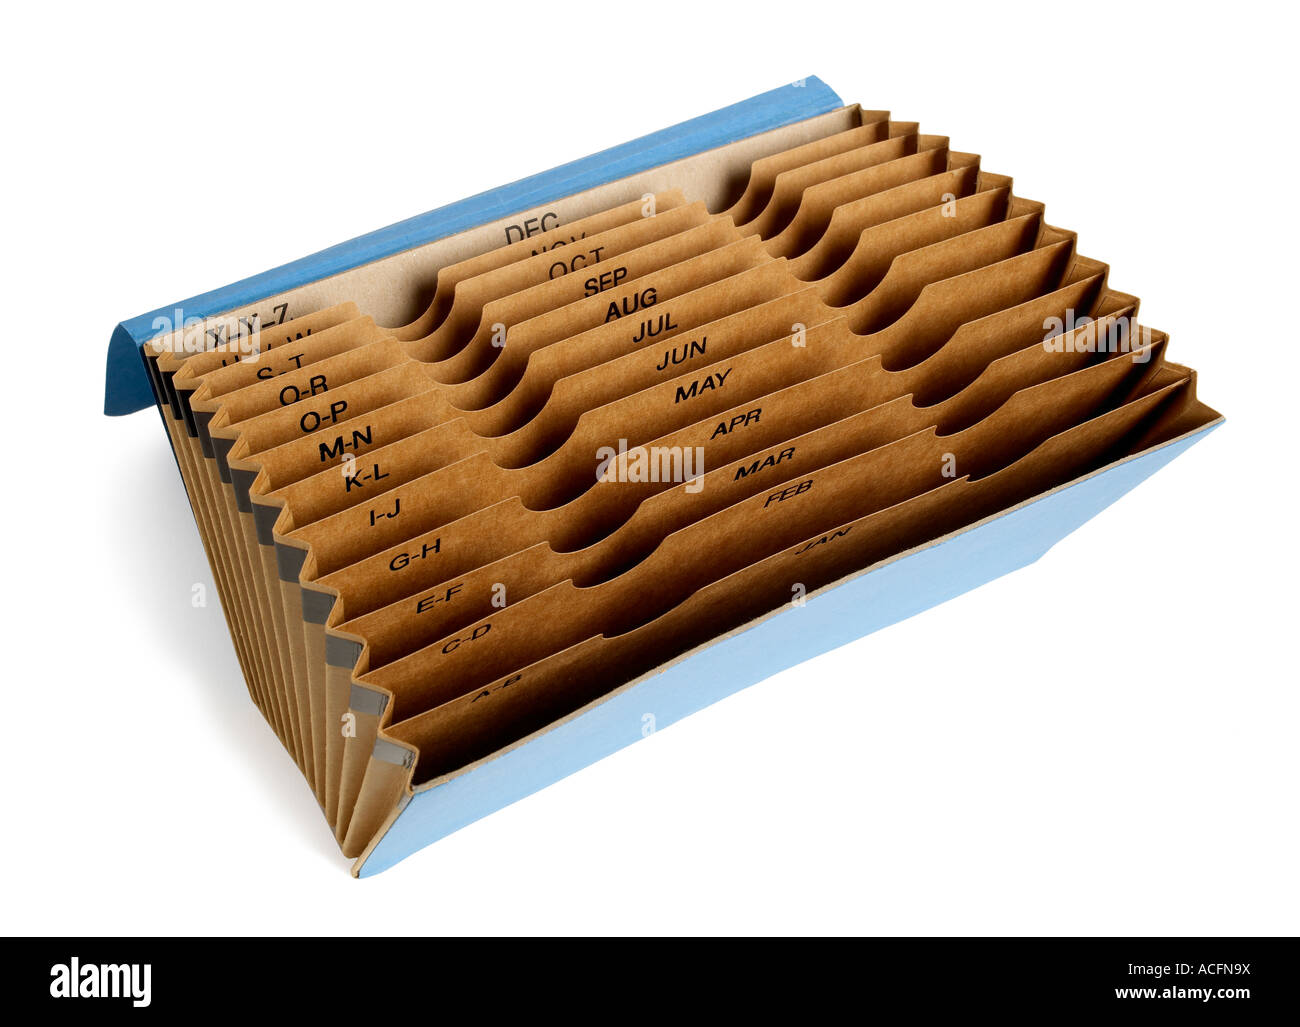 Accordion File elevated view Stock Photo